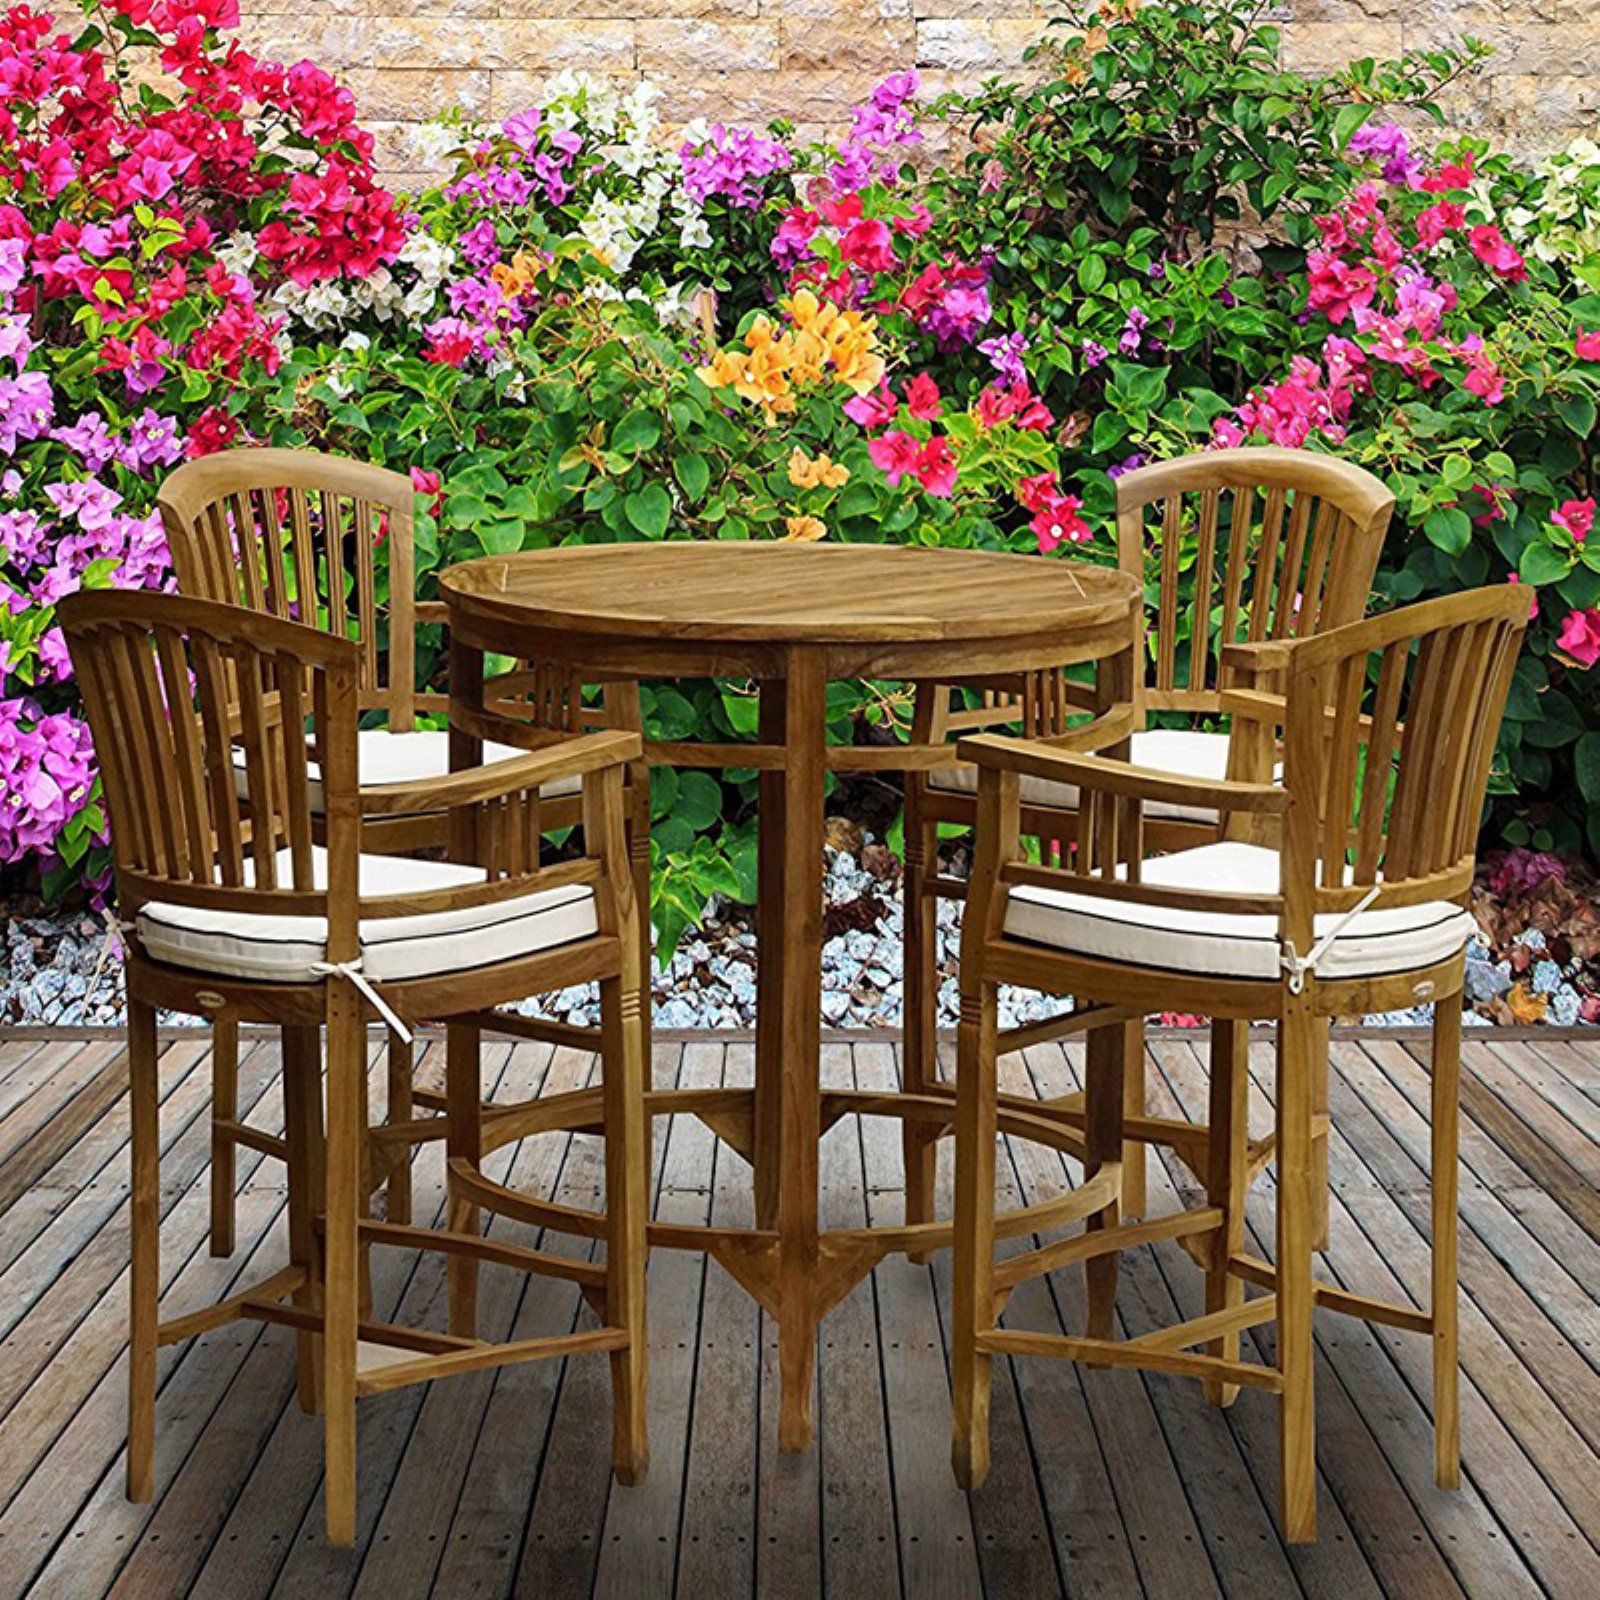 Chic Teak Orleans Round Teak 5 Piece Bar Height Patio Dining Set Regarding Teak Wood Outdoor Table And Chairs Sets (View 12 of 15)